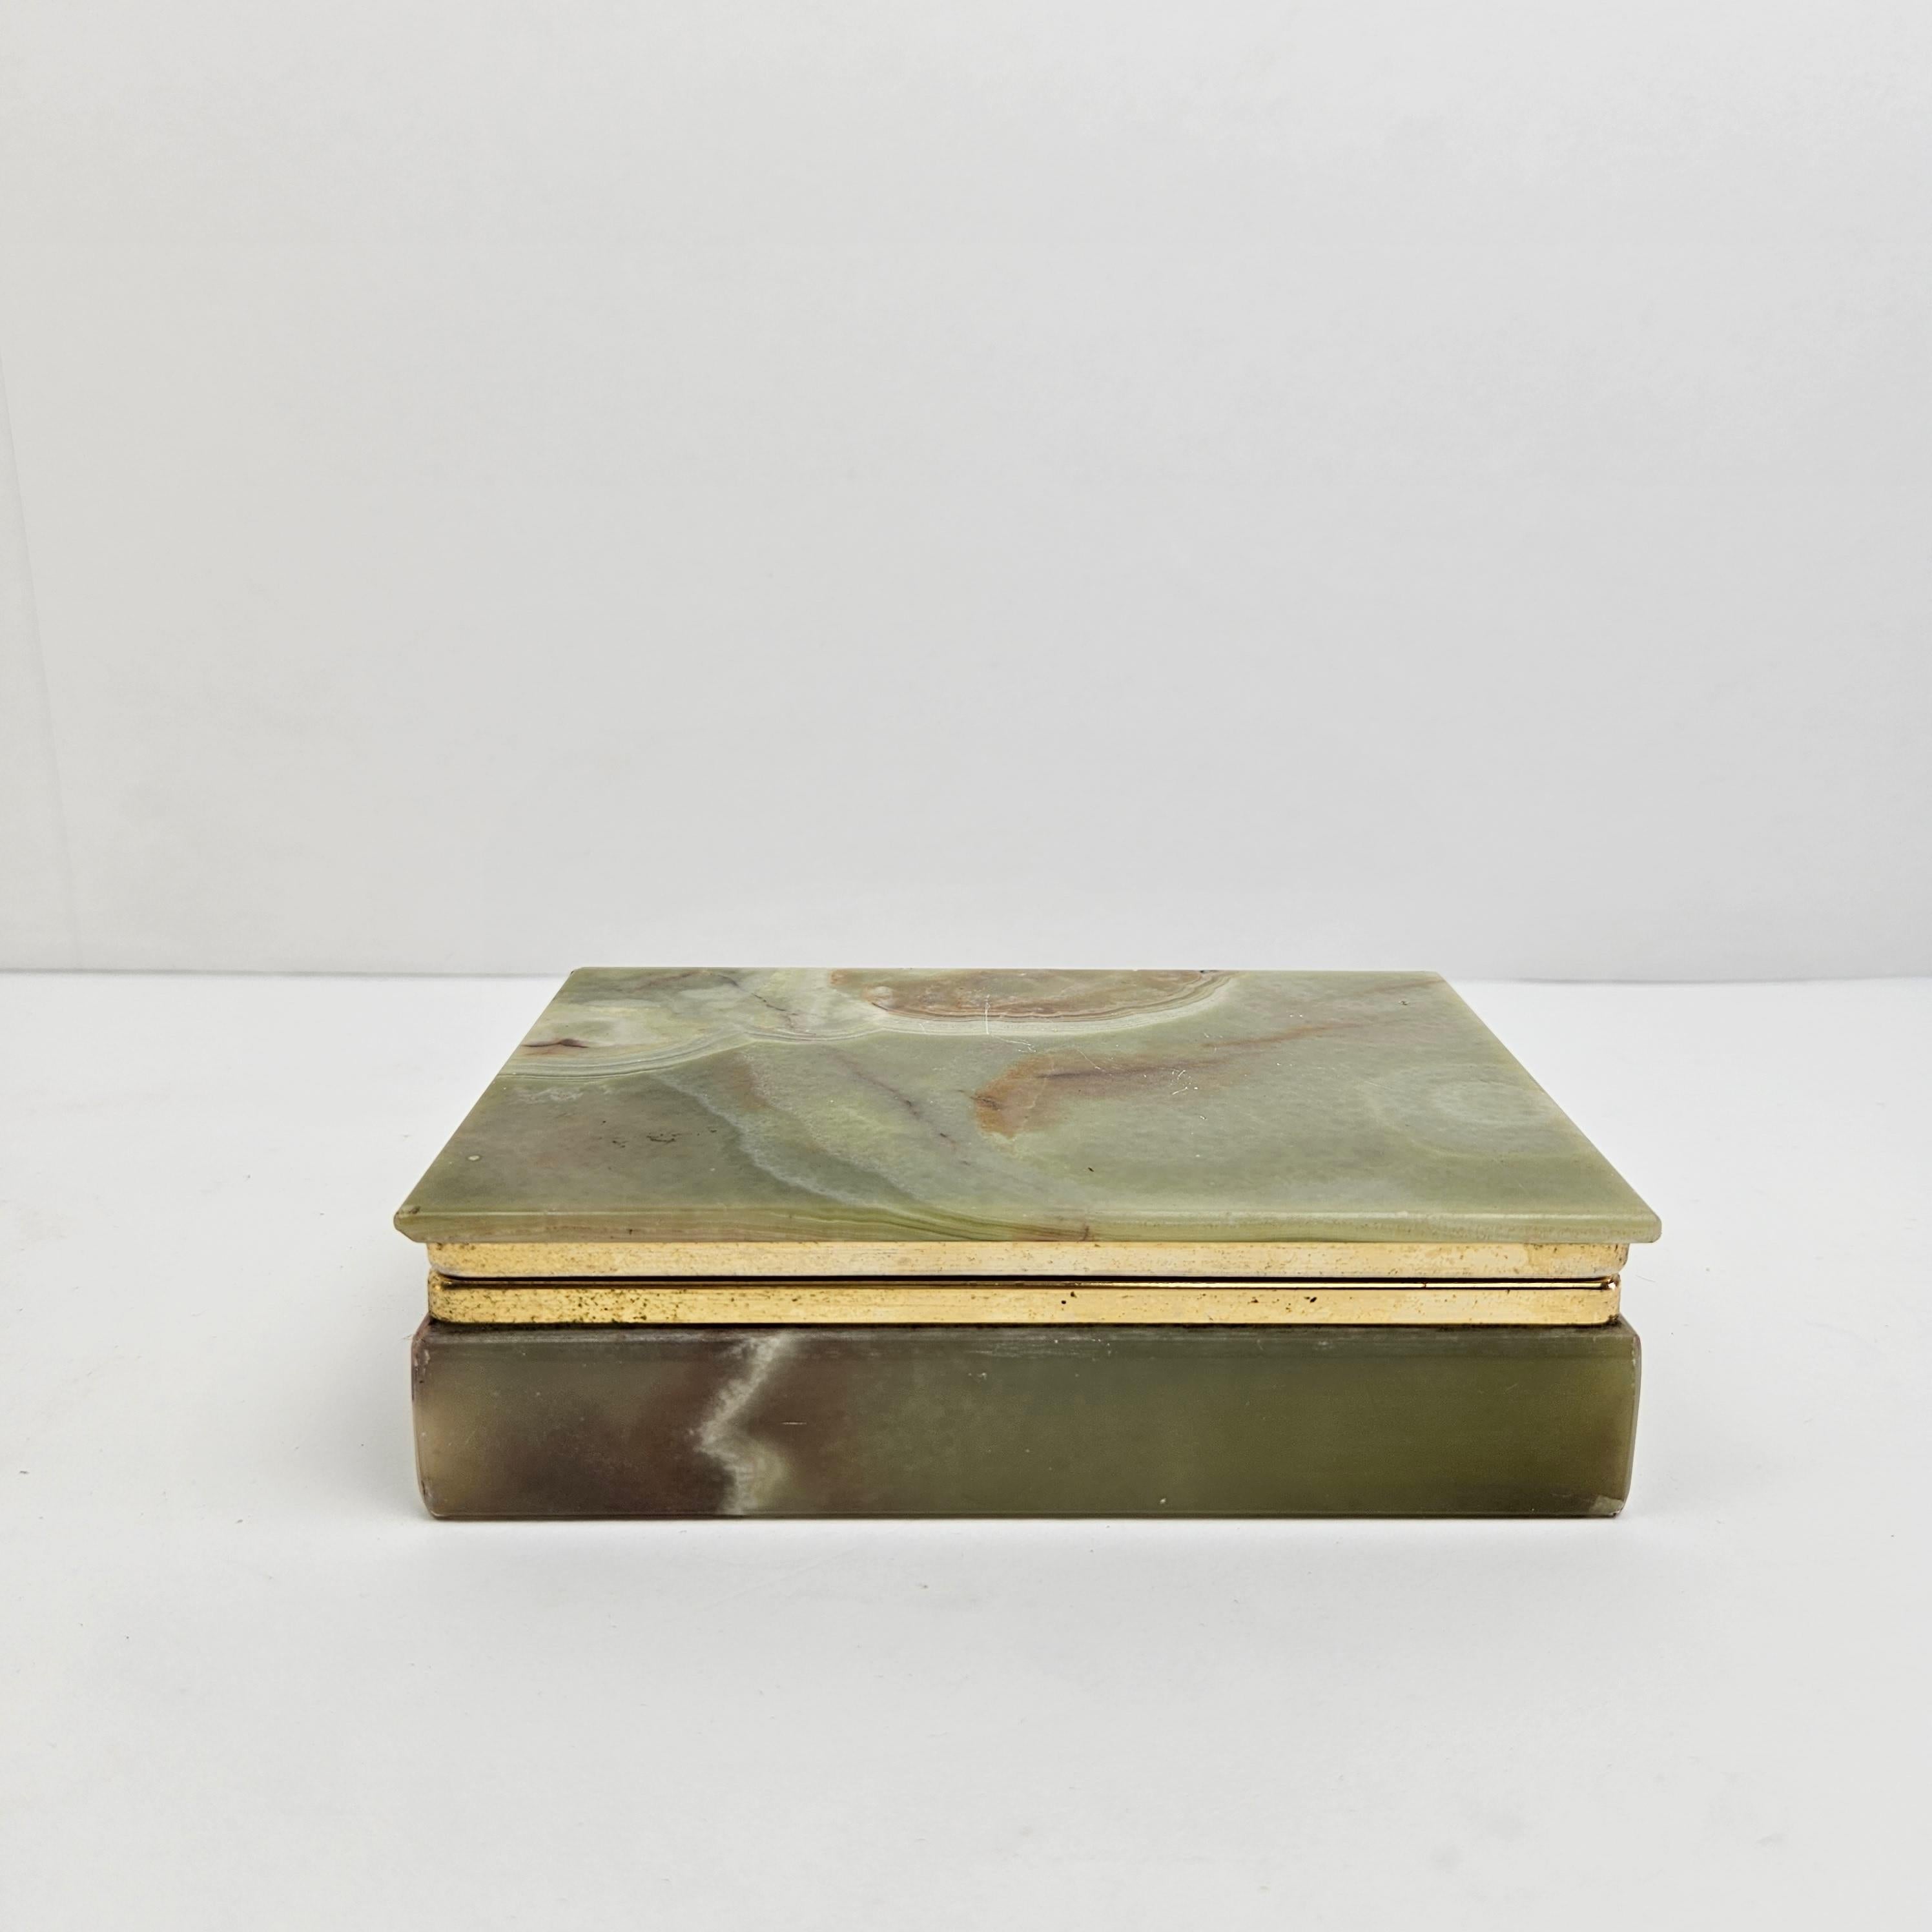 Very beautiful marble decorative or jewelry box.
This lovely box is made in Italy.

Meticulously handcrafted from luxurious marble.
This exquisite piece showcases the beauty of Italian craftsmanship, with its elegant design.
Finished with